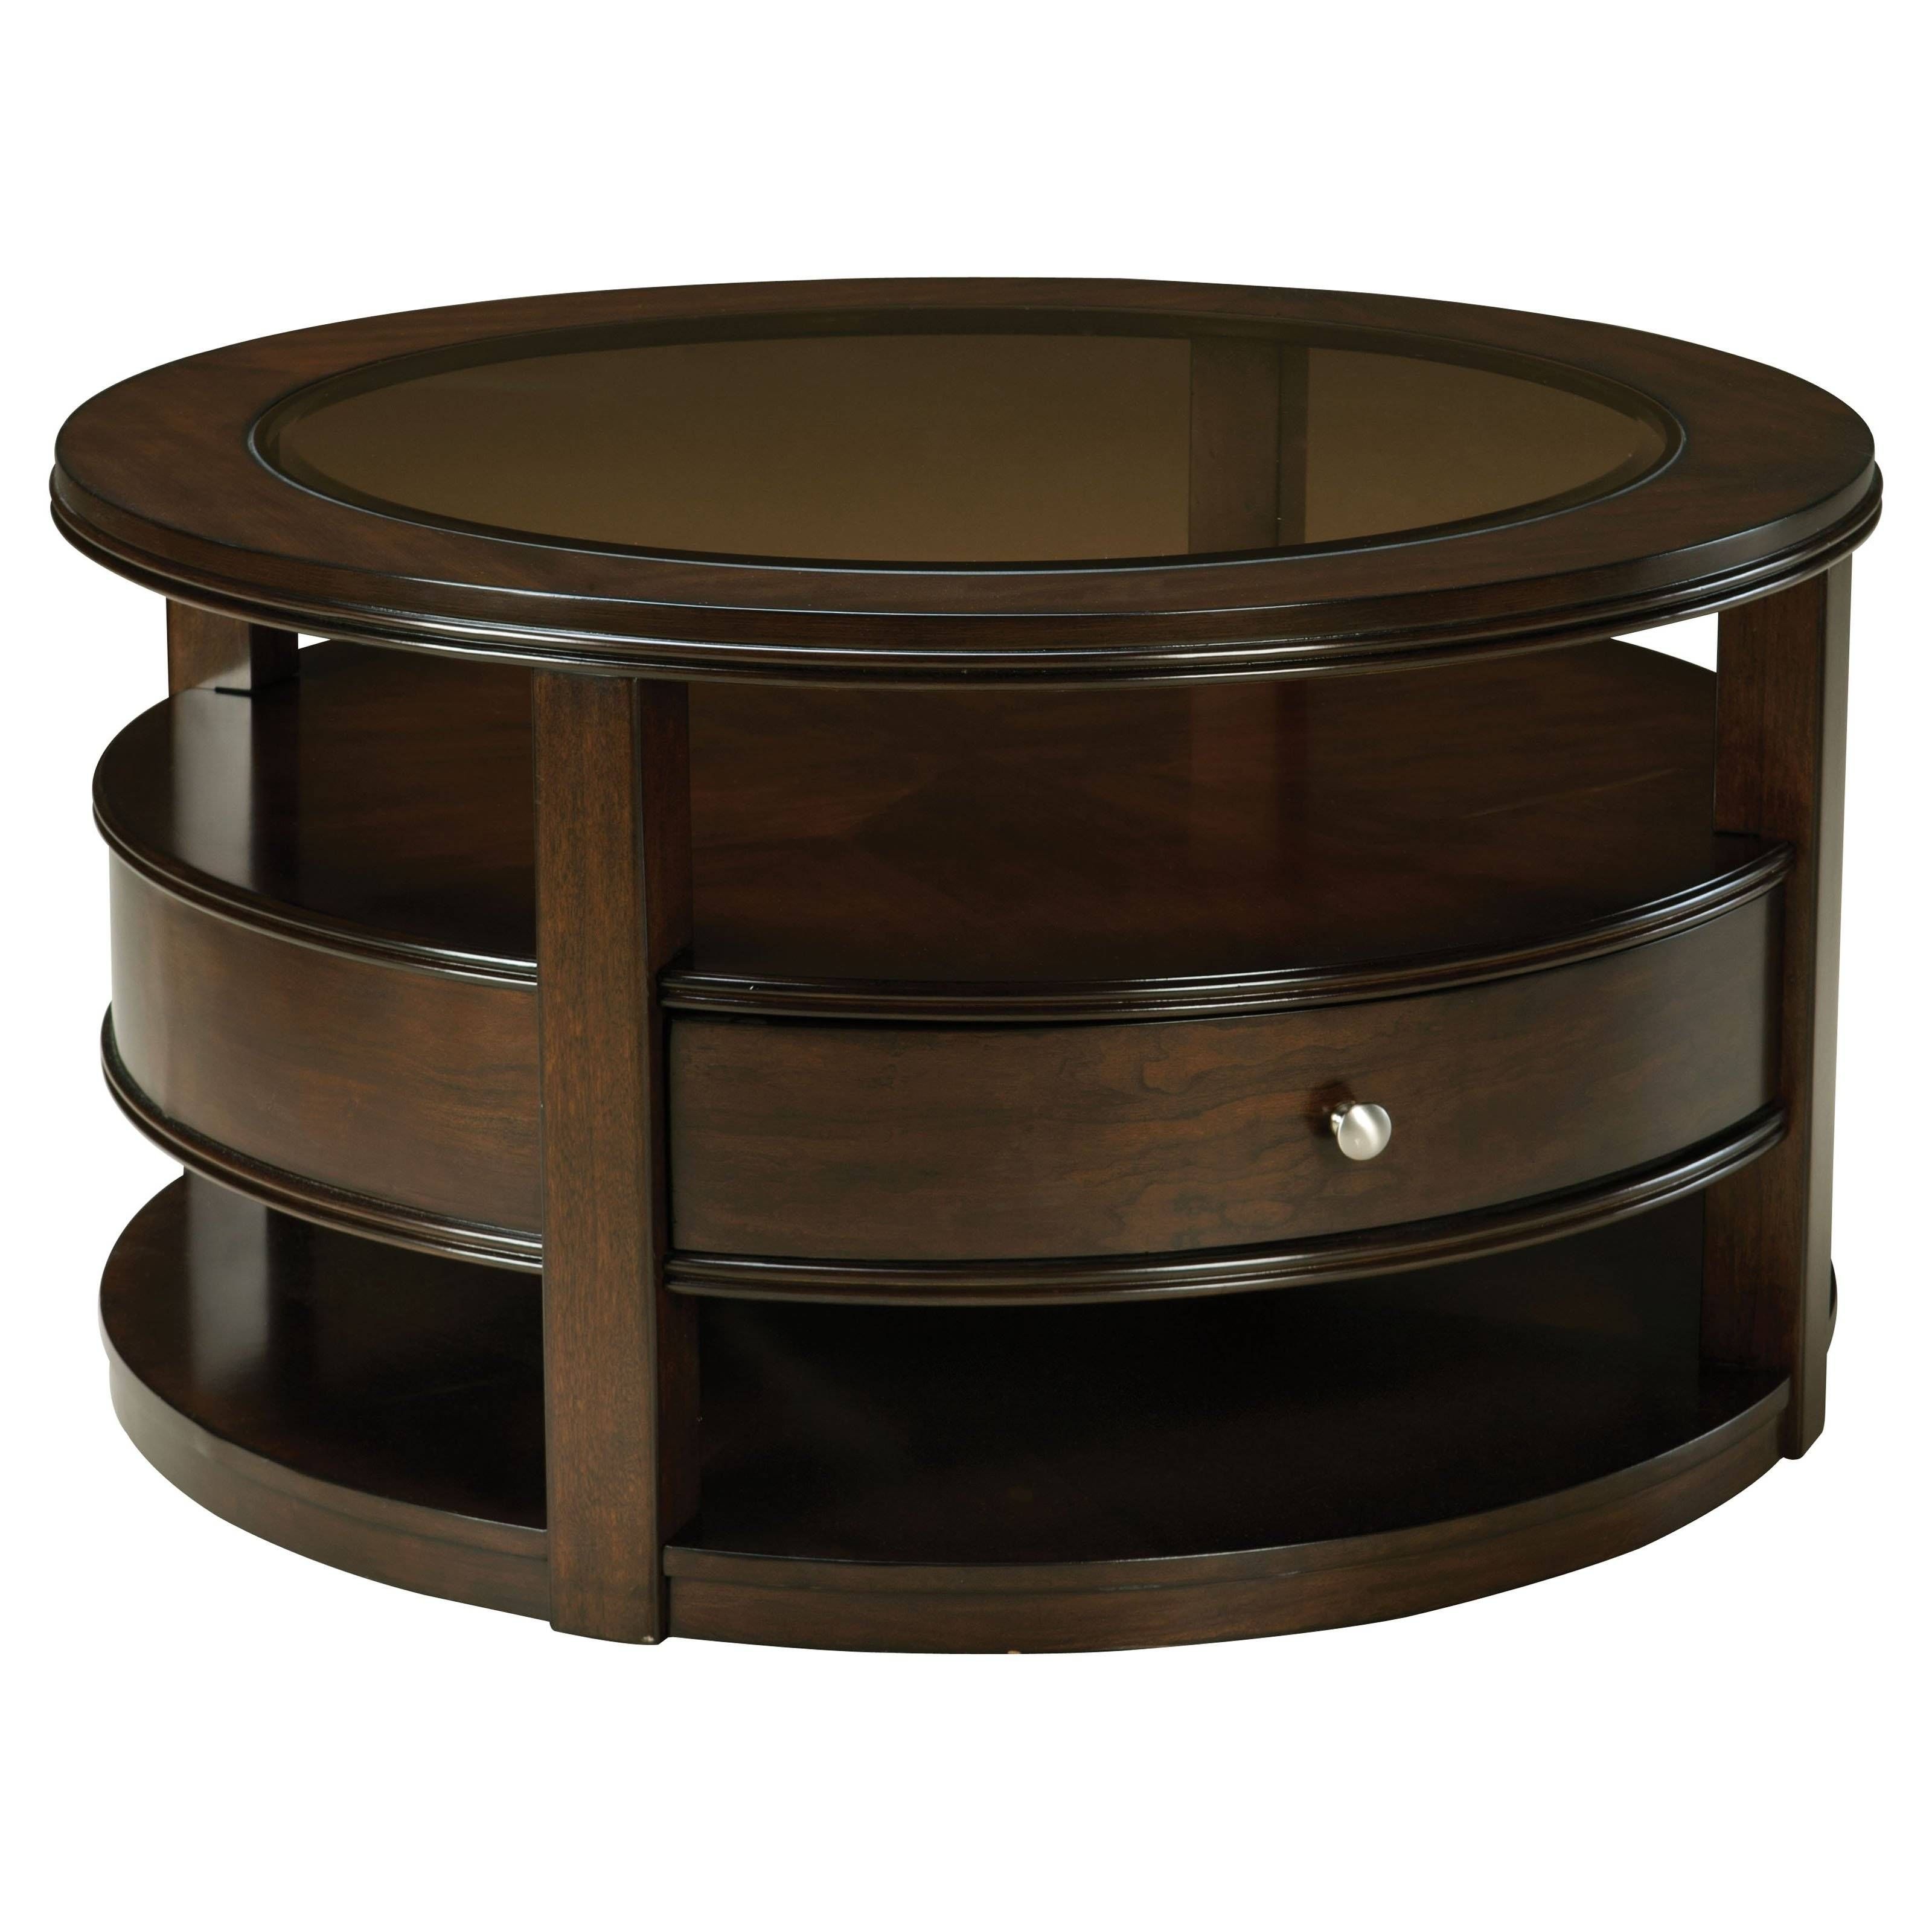 Round Wood Coffee Table With Glass Top Regarding Dark Wood Coffee Tables With Glass Top (View 24 of 30)